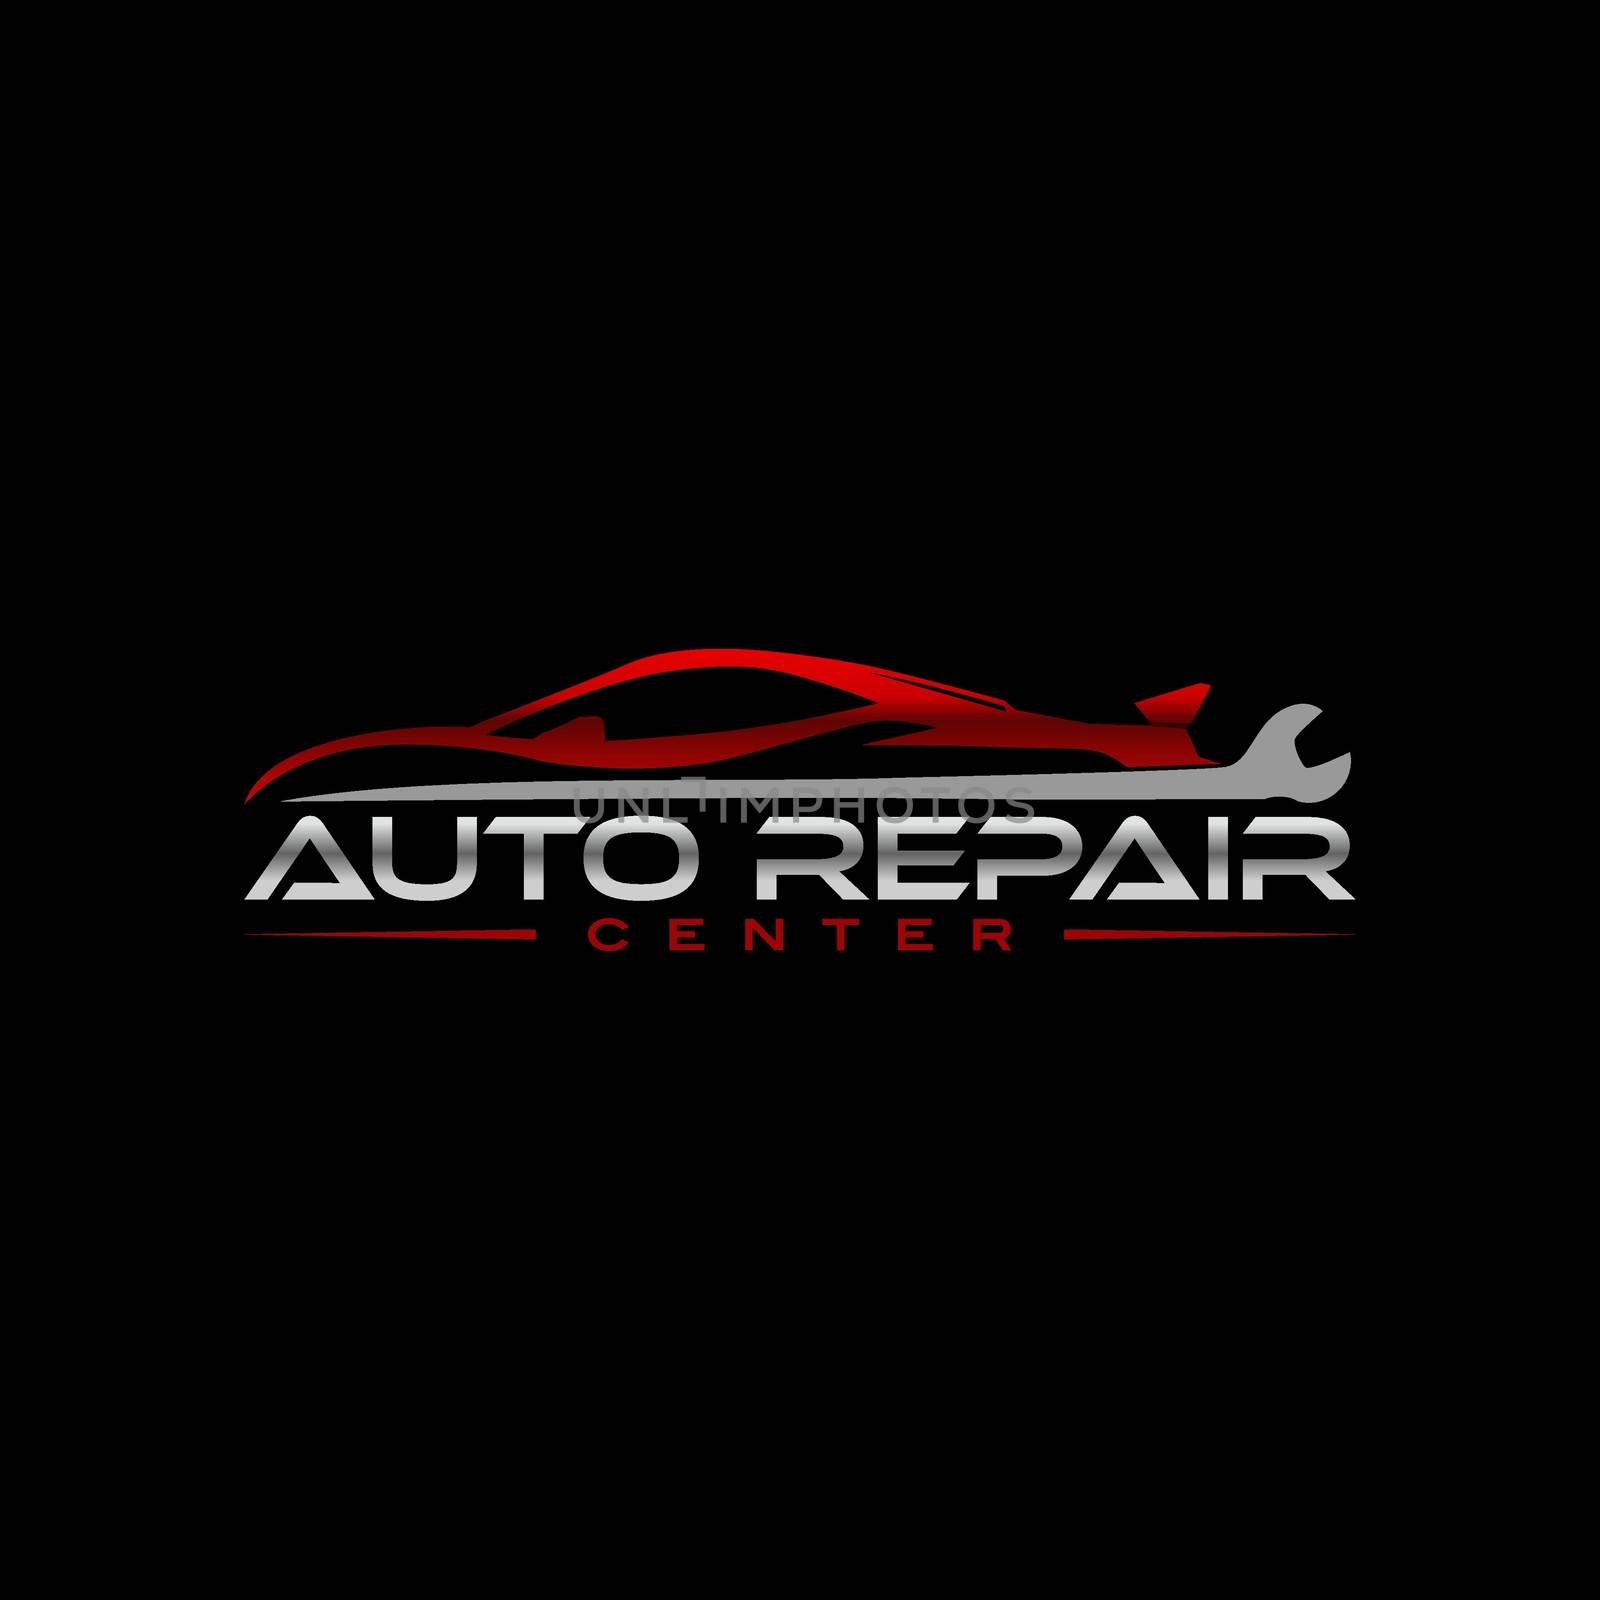 auto car repair service logo concept. sportcar with wrench elements stock illustration.